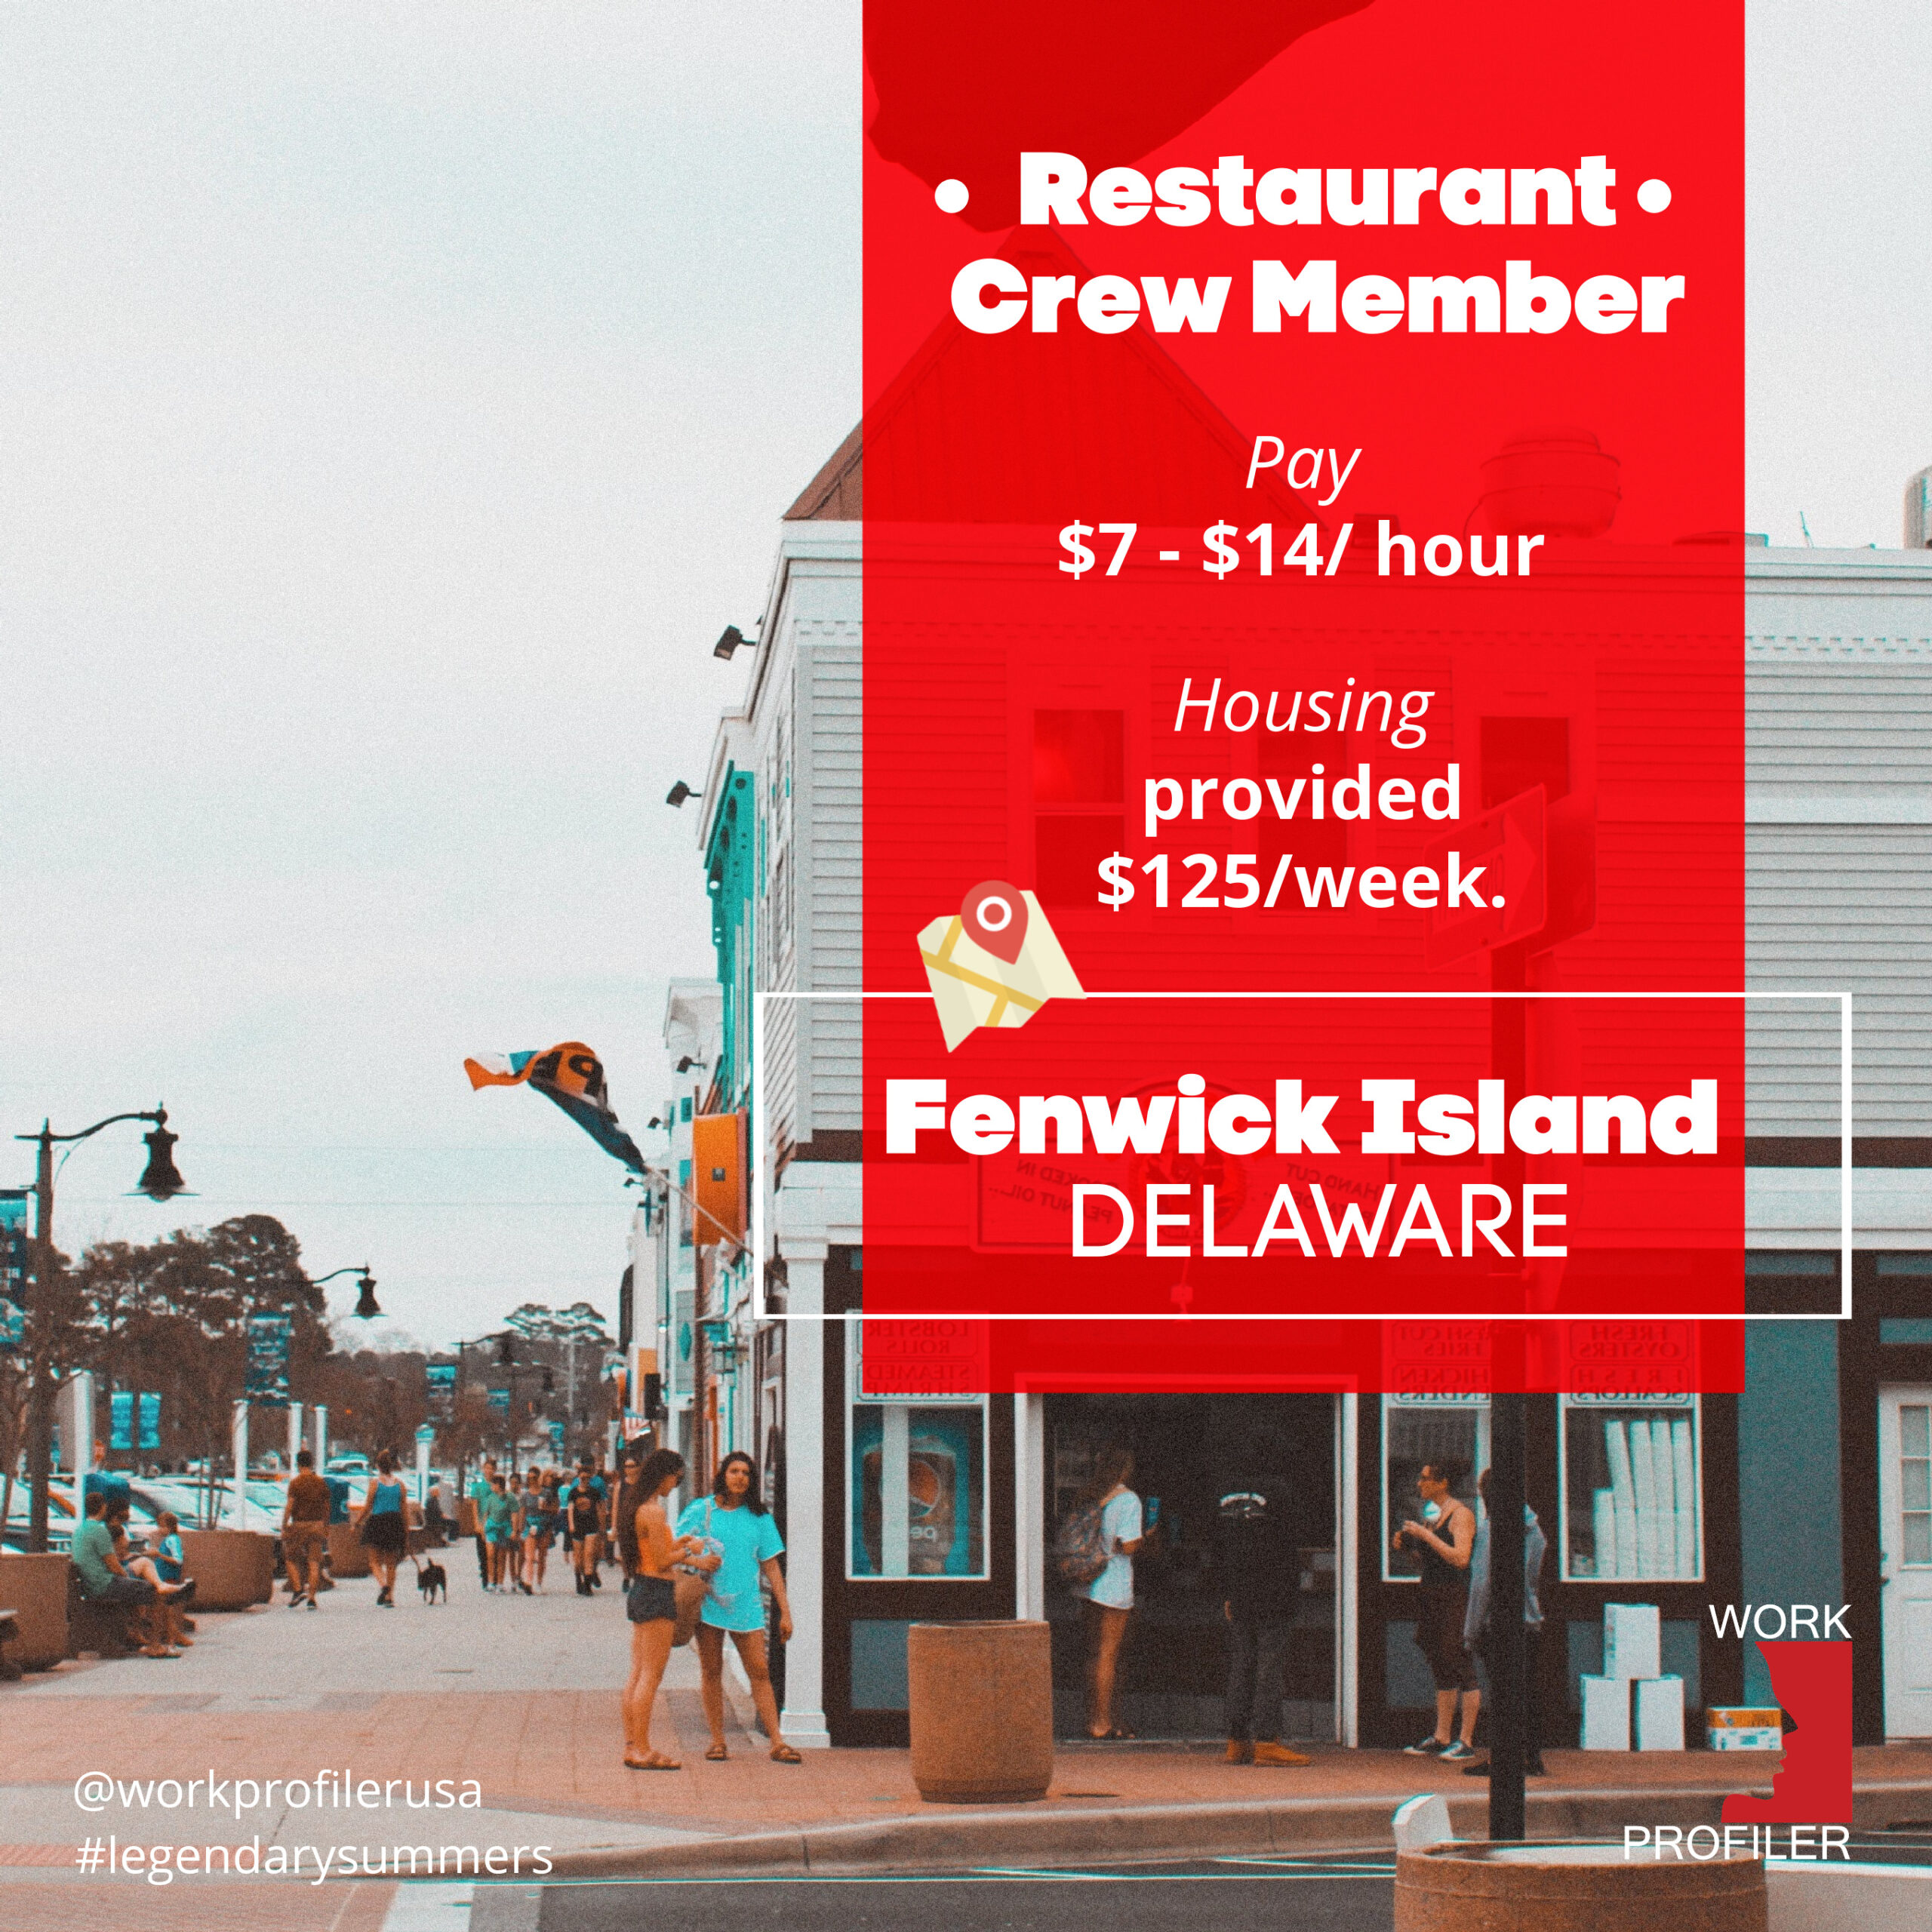 A job advertisement poster with black text on a yellow background. The poster advertises a restaurant crew member position in Fenwick Island, Delaware, offering pay between $7 and $14 per hour and housing provided for $125 per week.